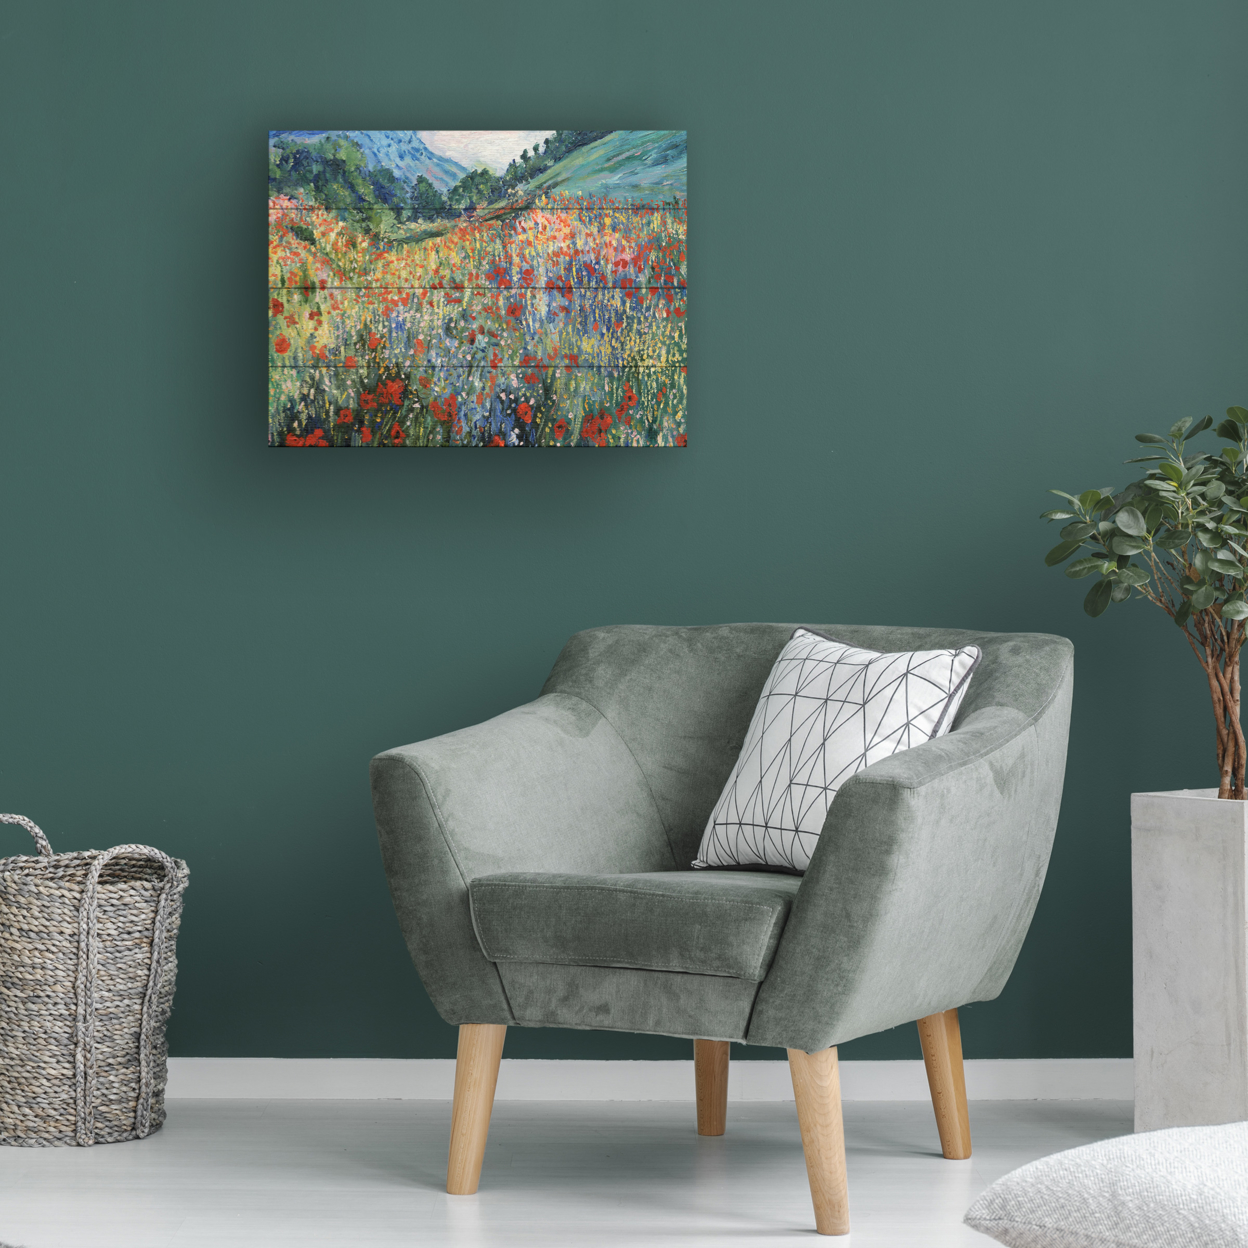 Wall Art 12 X 16 Inches Titled Field Of Wild Flowers Ready To Hang Printed On Wooden Planks